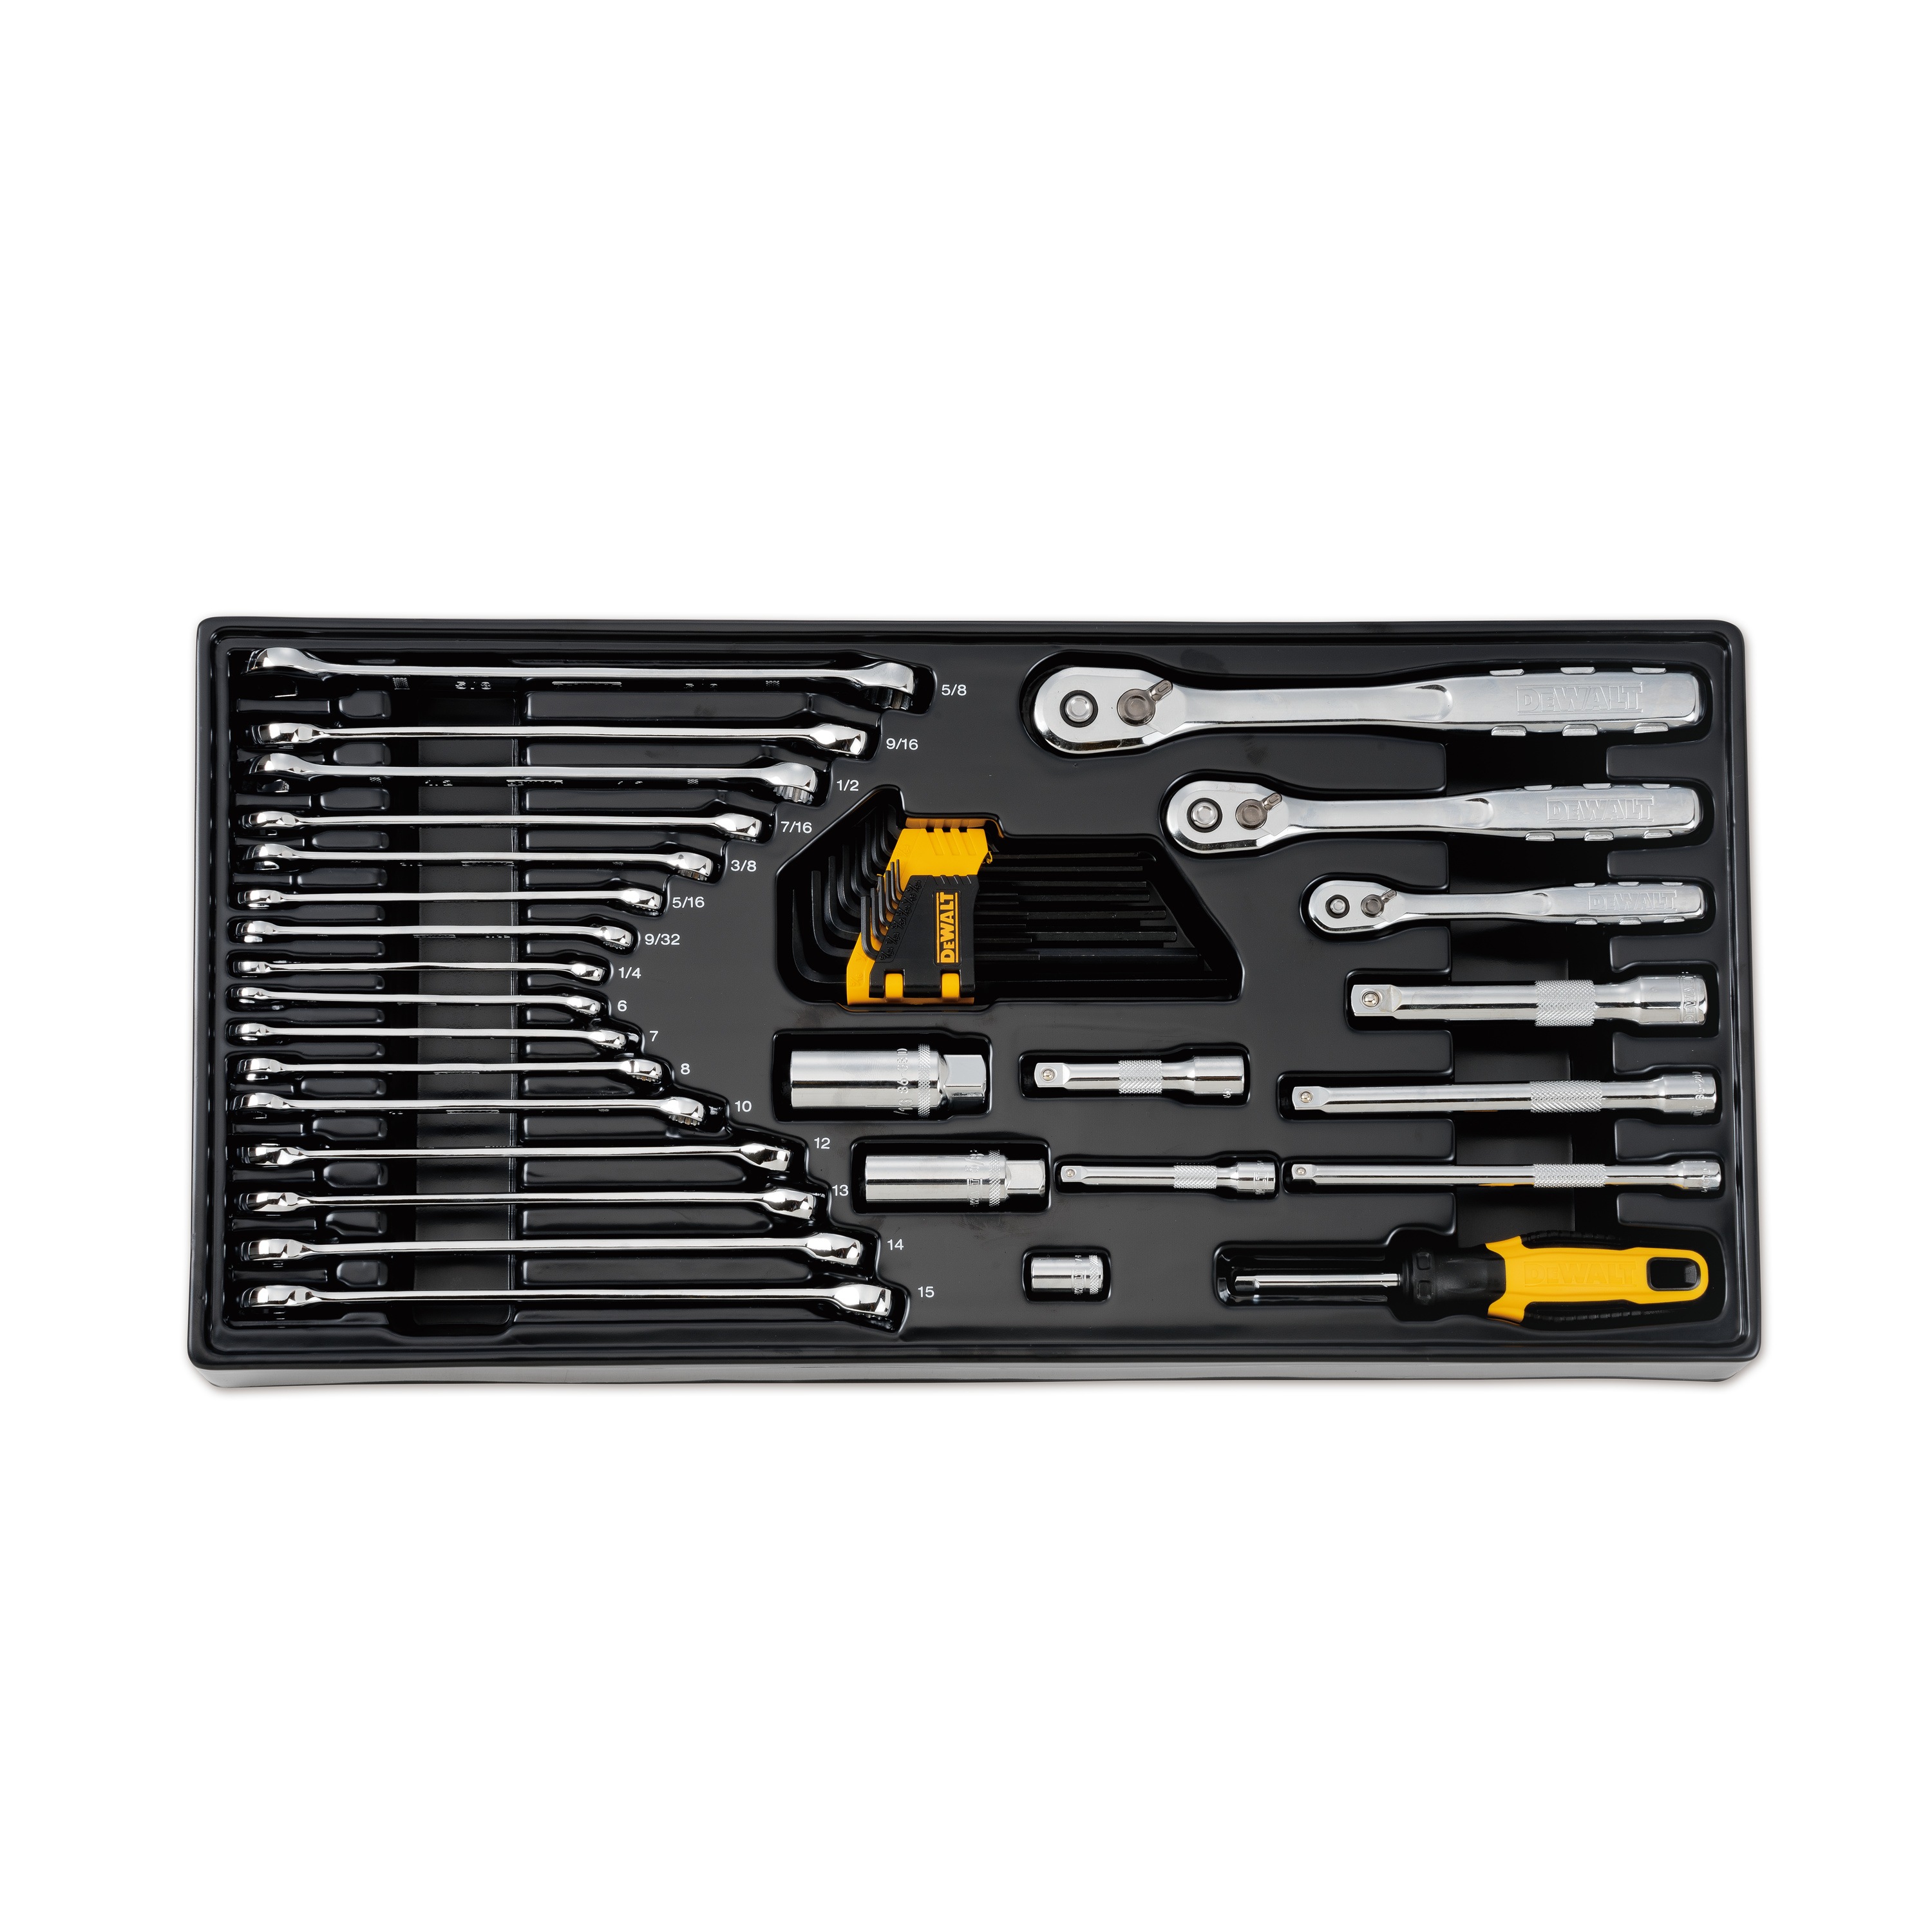 Profile of 341 piece DEWALT mechanics tools set in a removable tray.